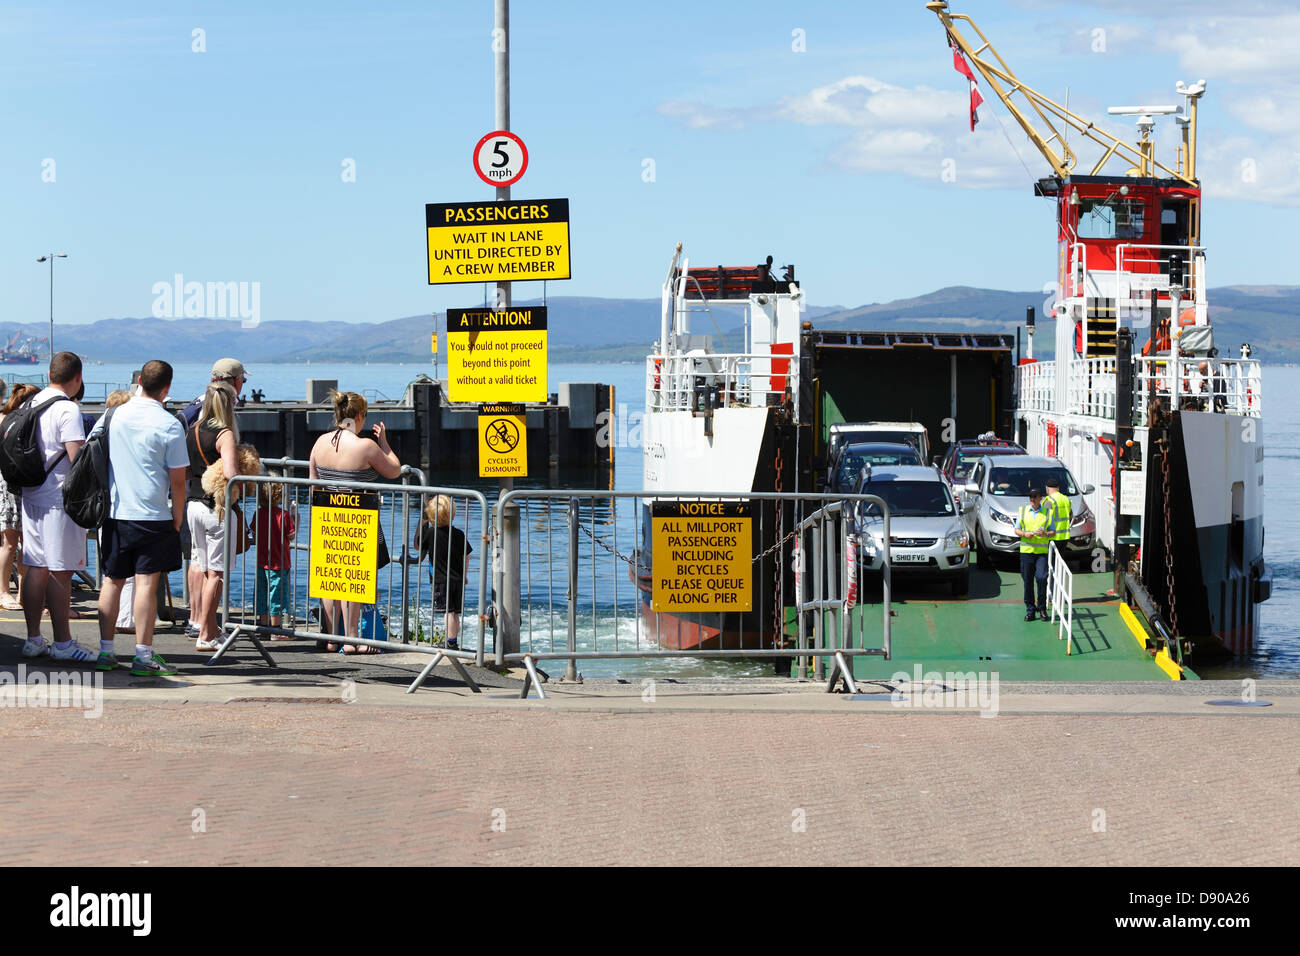 Largs Harbour, North Ayrshire, Scotland, UK, Friday, 7th June 2013. Passengers waiting on the slipway for cars to disembark before boarding a Caledonian MacBrayne Ferry to sail to the Island of Great Cumbrae in the Firth of Clyde Stock Photo